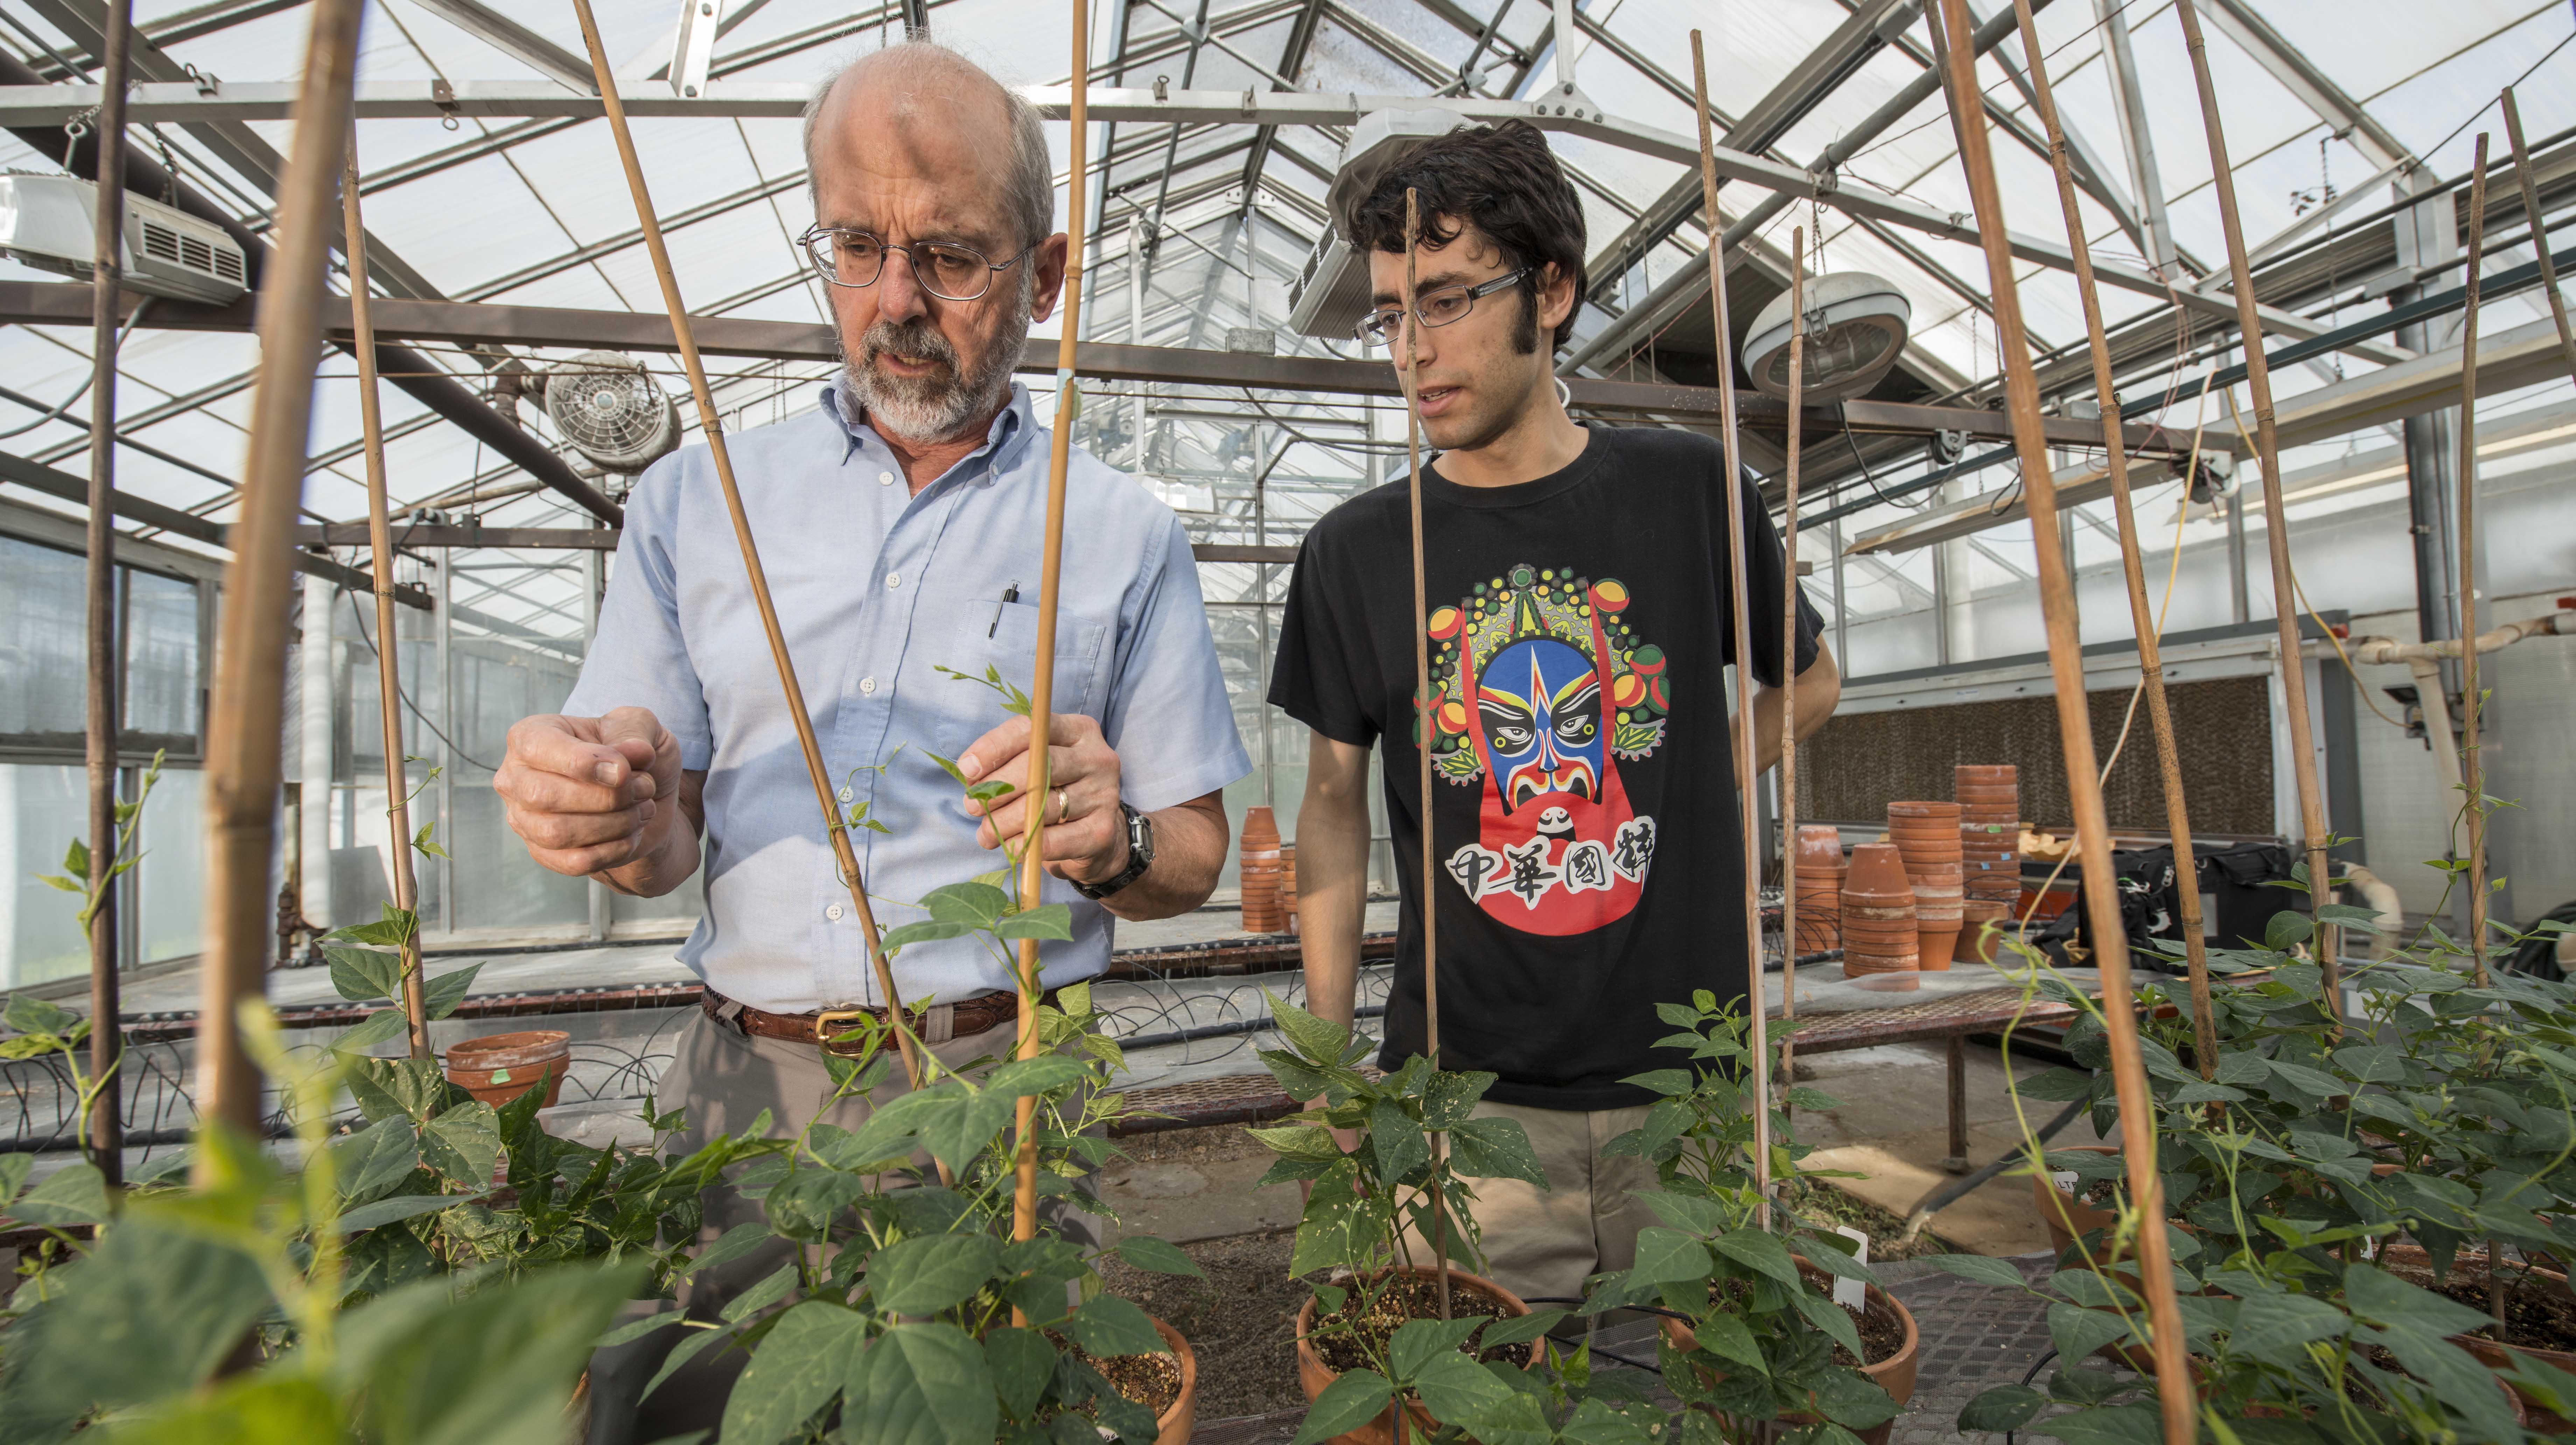 A professor shows a student working on a horticulture degree how to tend to plants in a greenhouse.